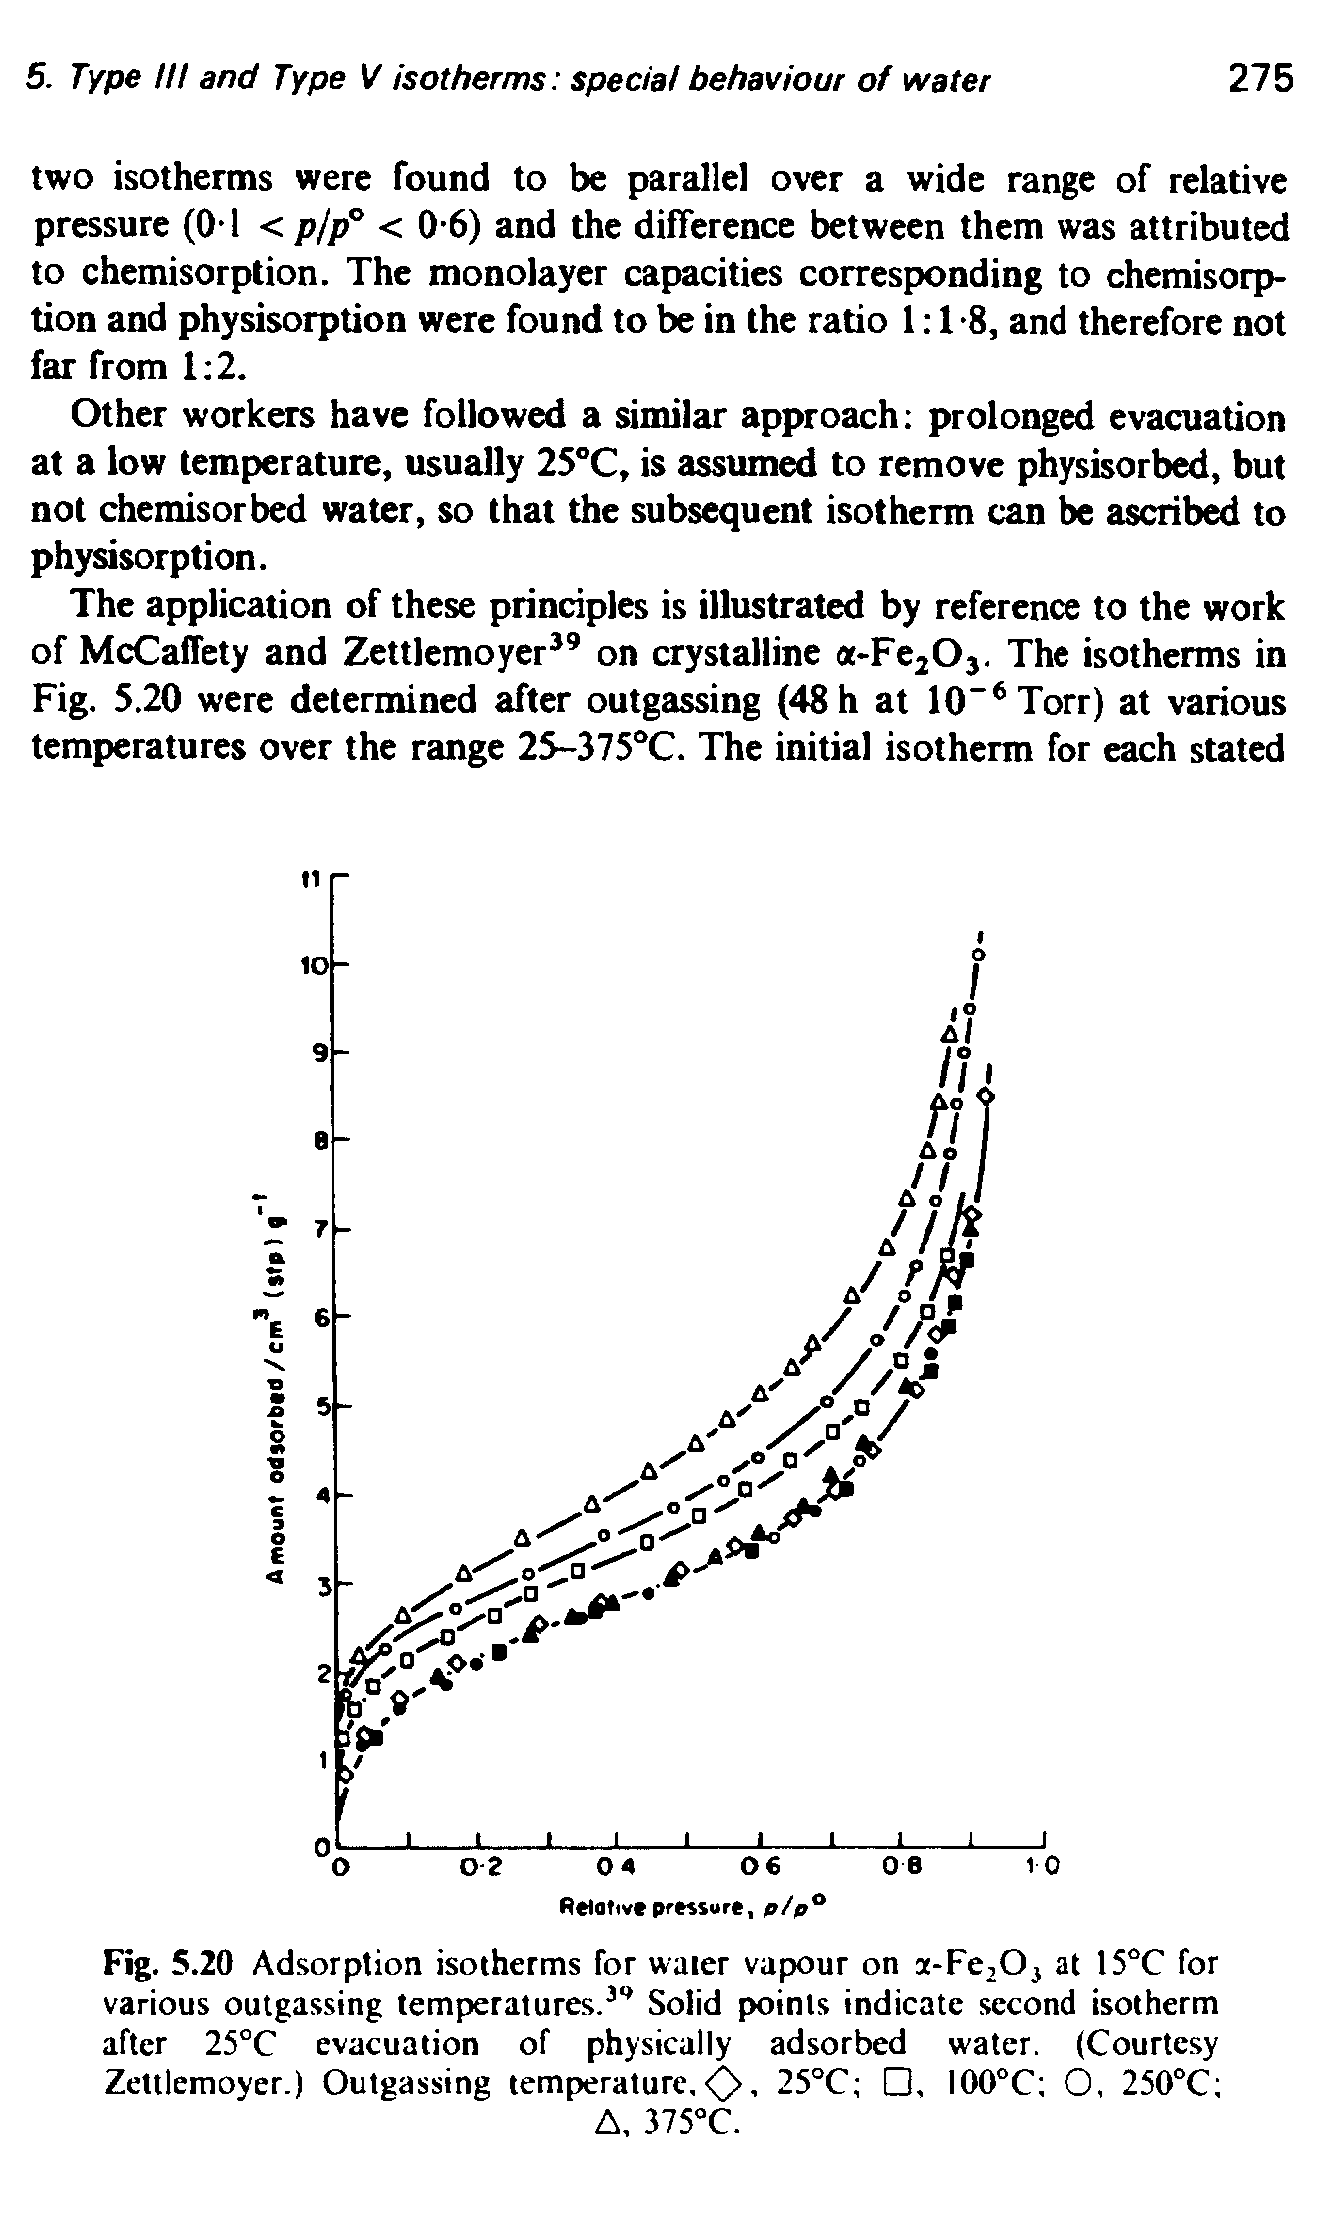 Fig. 5.20 Adsorption isotherms for water vapour on x-Fe,Oj at 15°C for various outgassing temperatures. Solid points indicate second isotherm after 25°C evacuation of physically adsorbed water. (Courtesy Zettlemoyer.) Outgassing temperature,<, 25°C , I00°C O, 250°C ...